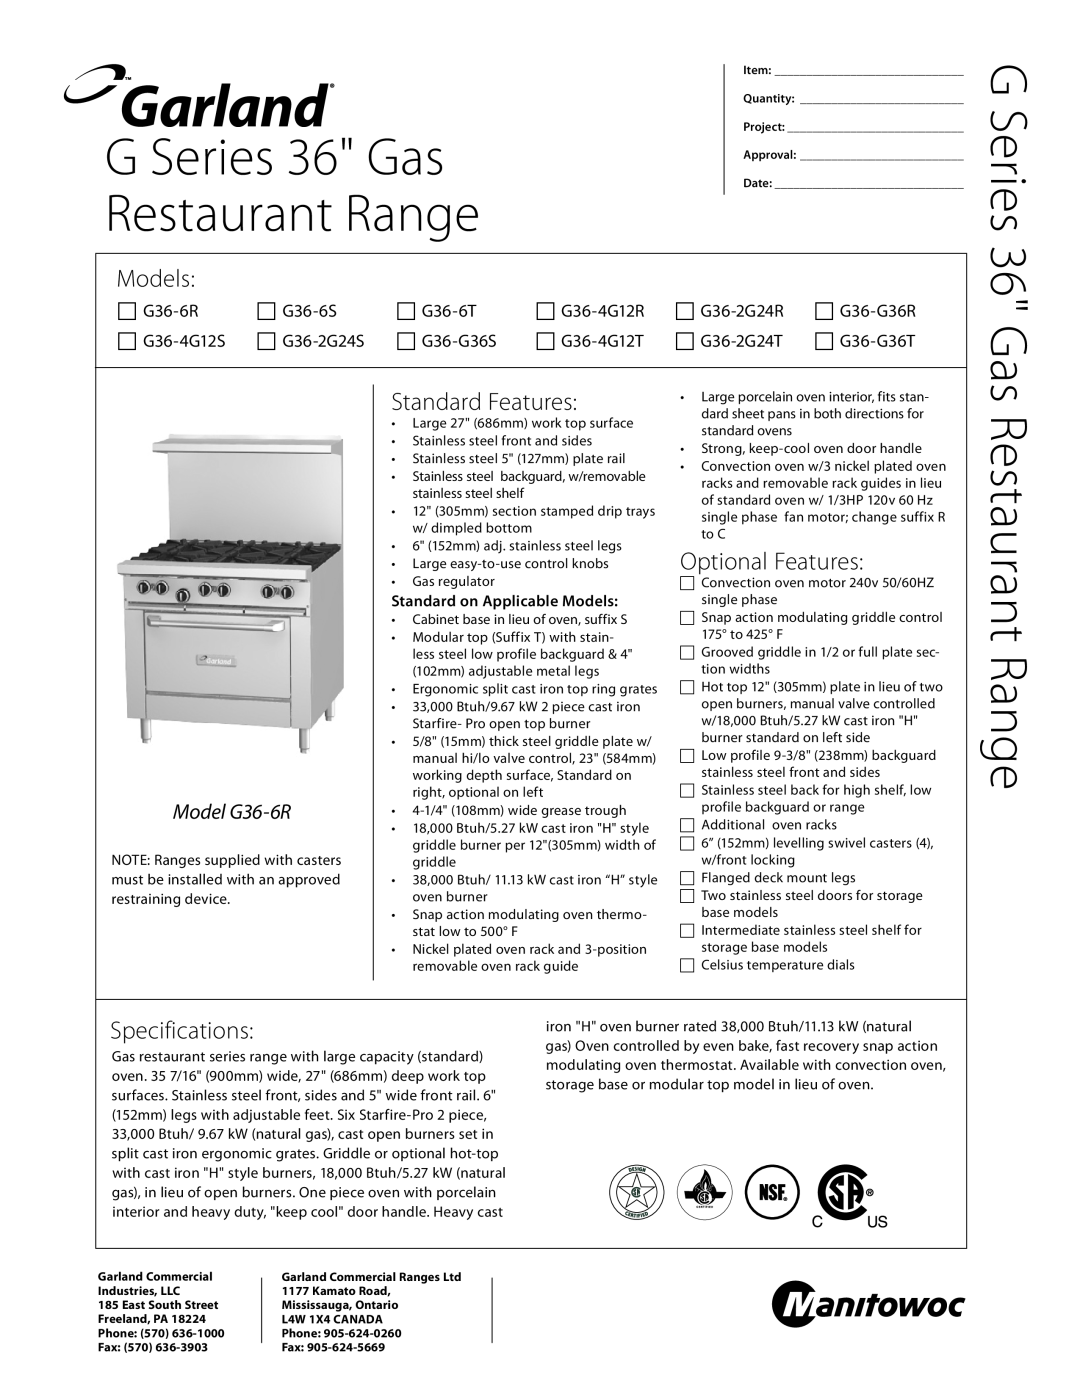 Garland G36-6S specifications G Series 36 Gas Restaurant Range, Models, Standard Features, Optional Features 